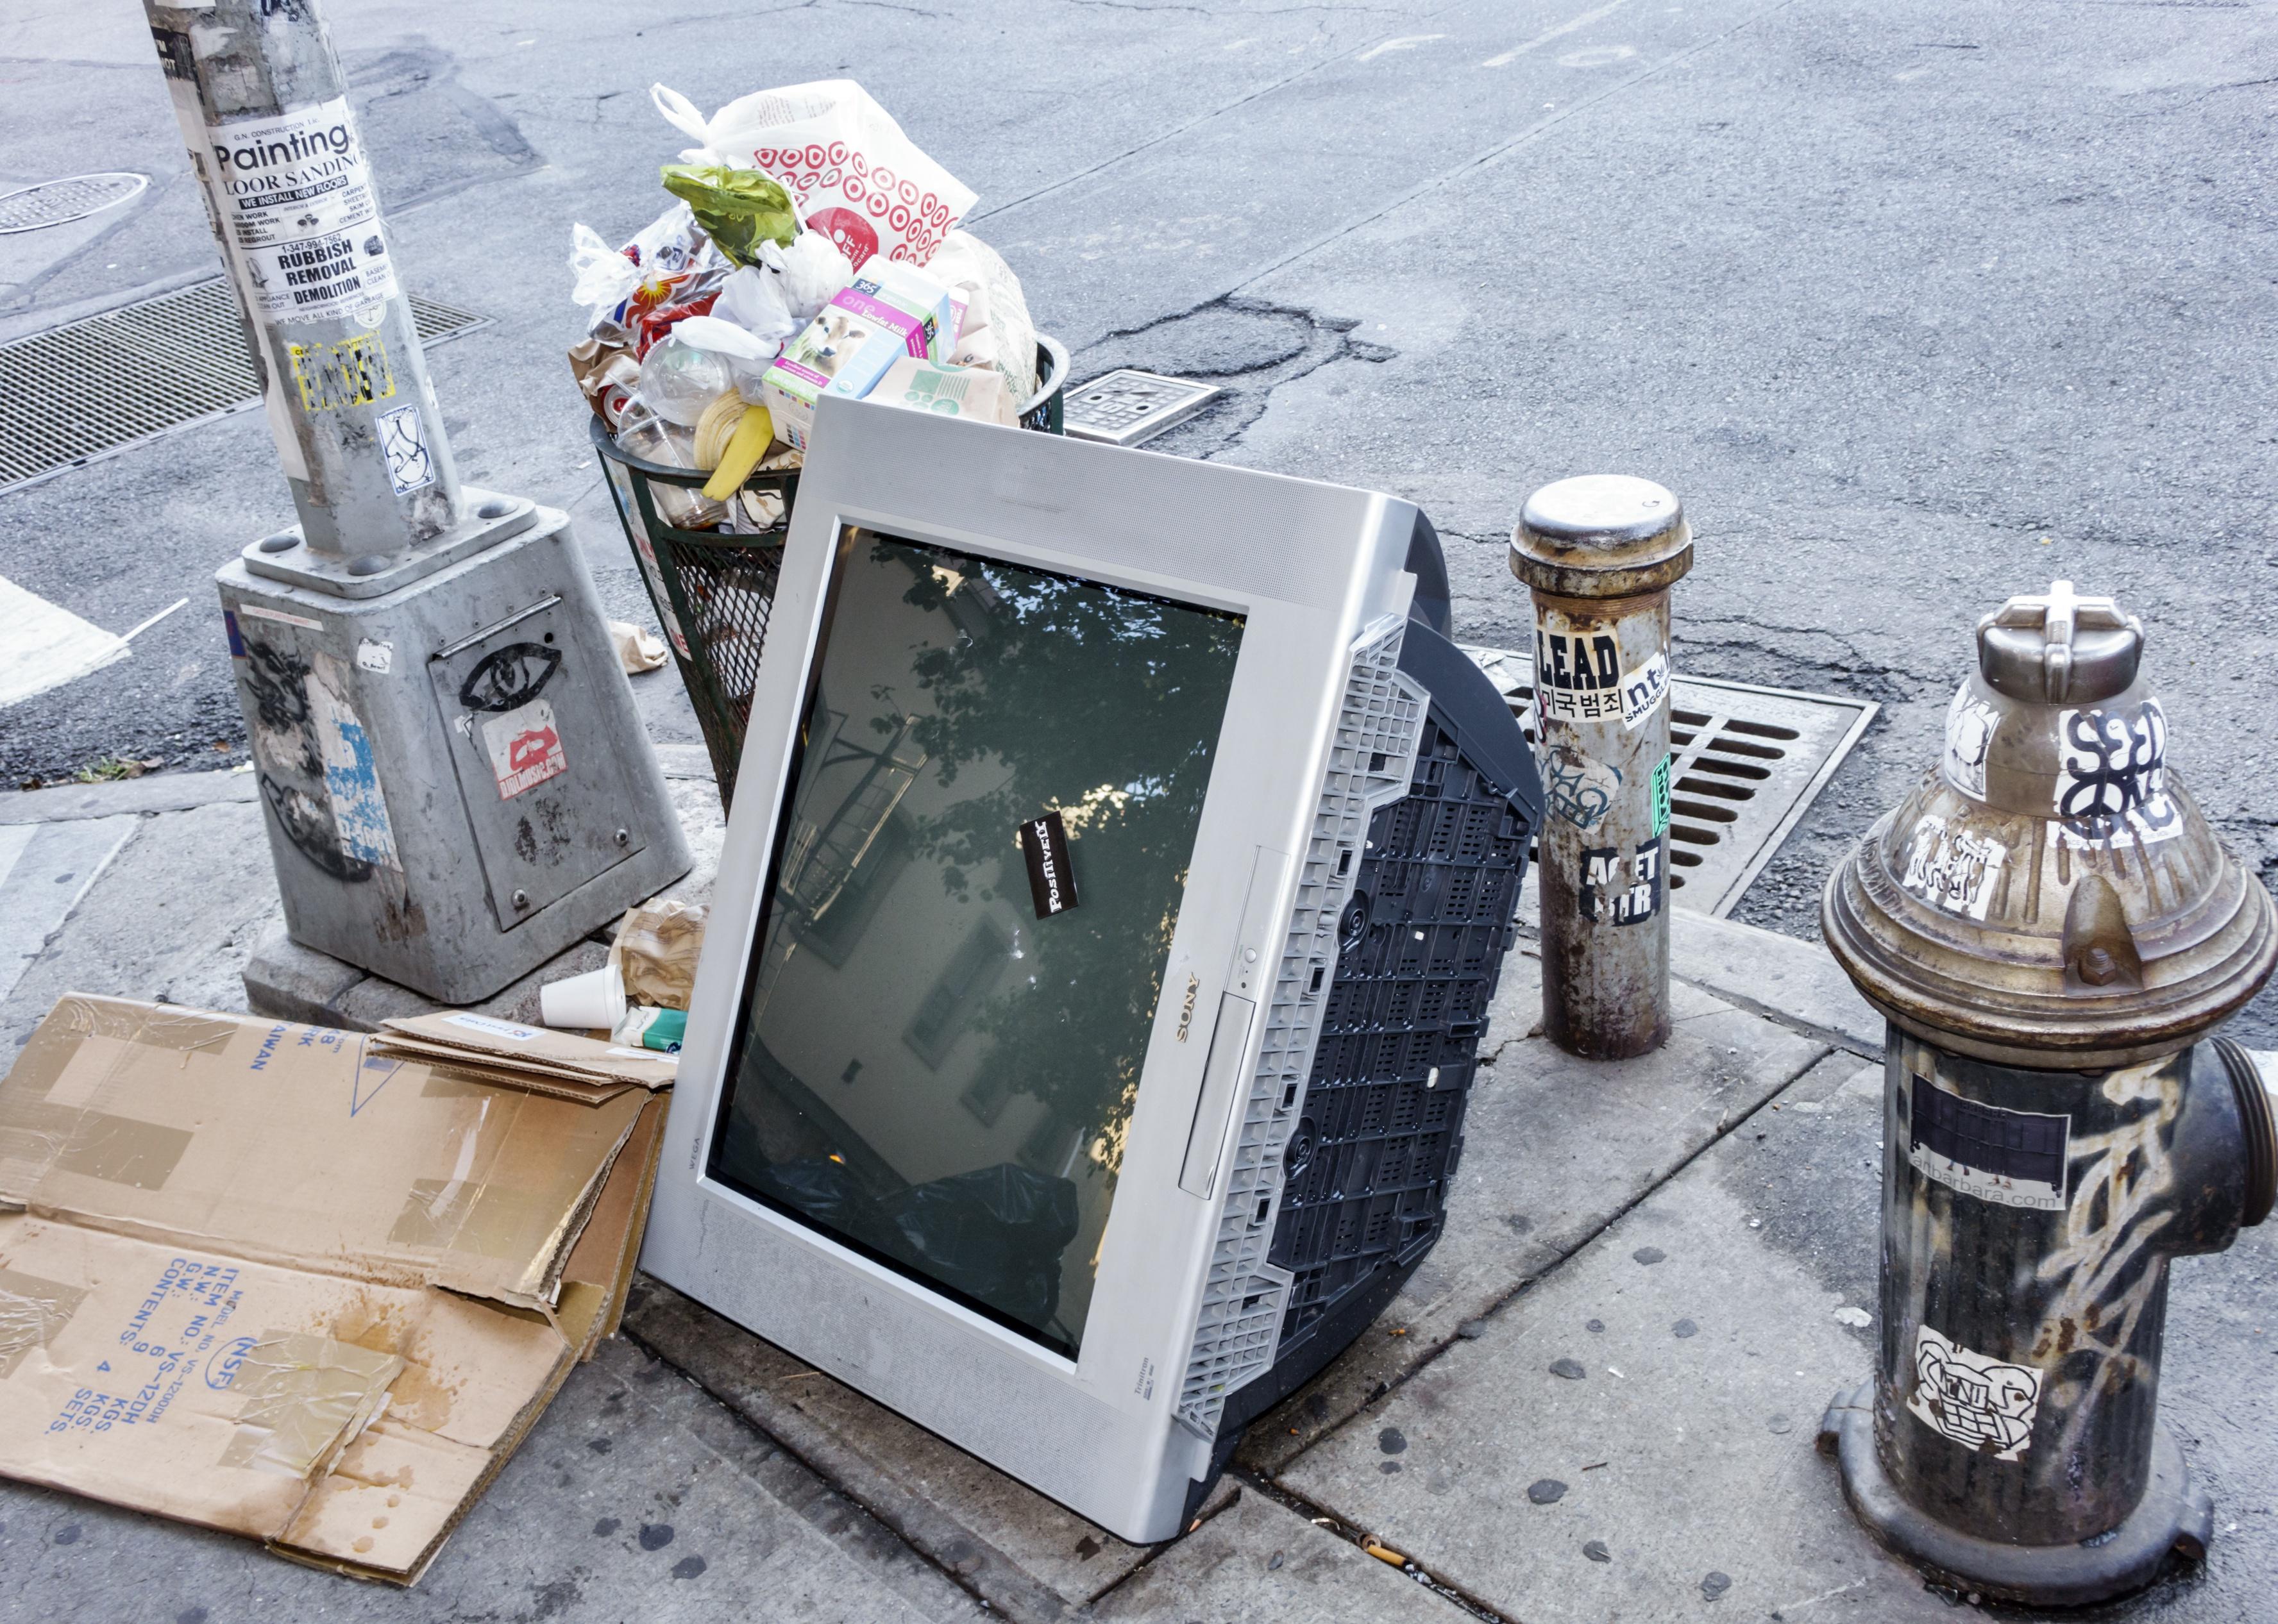 A TV and other garbage dumped on the side of the street.